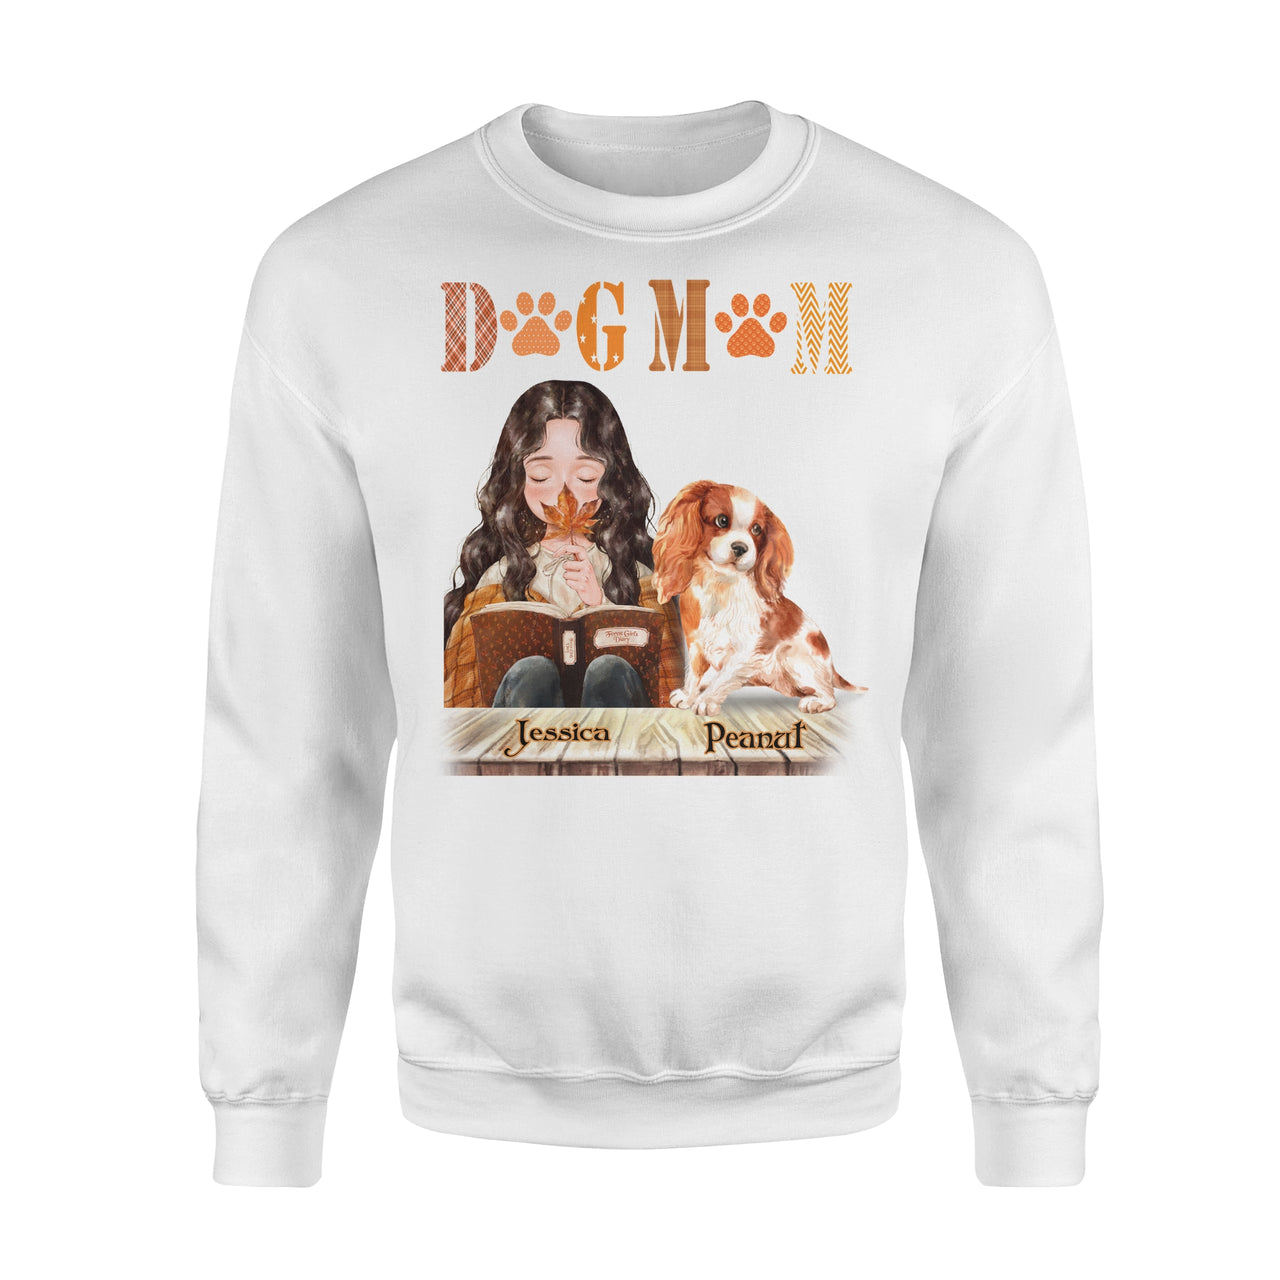 Personalized Dog Gift Idea - Dog Mom And Book, Gift For Dog Lover - Standard Crew Neck Sweatshirt